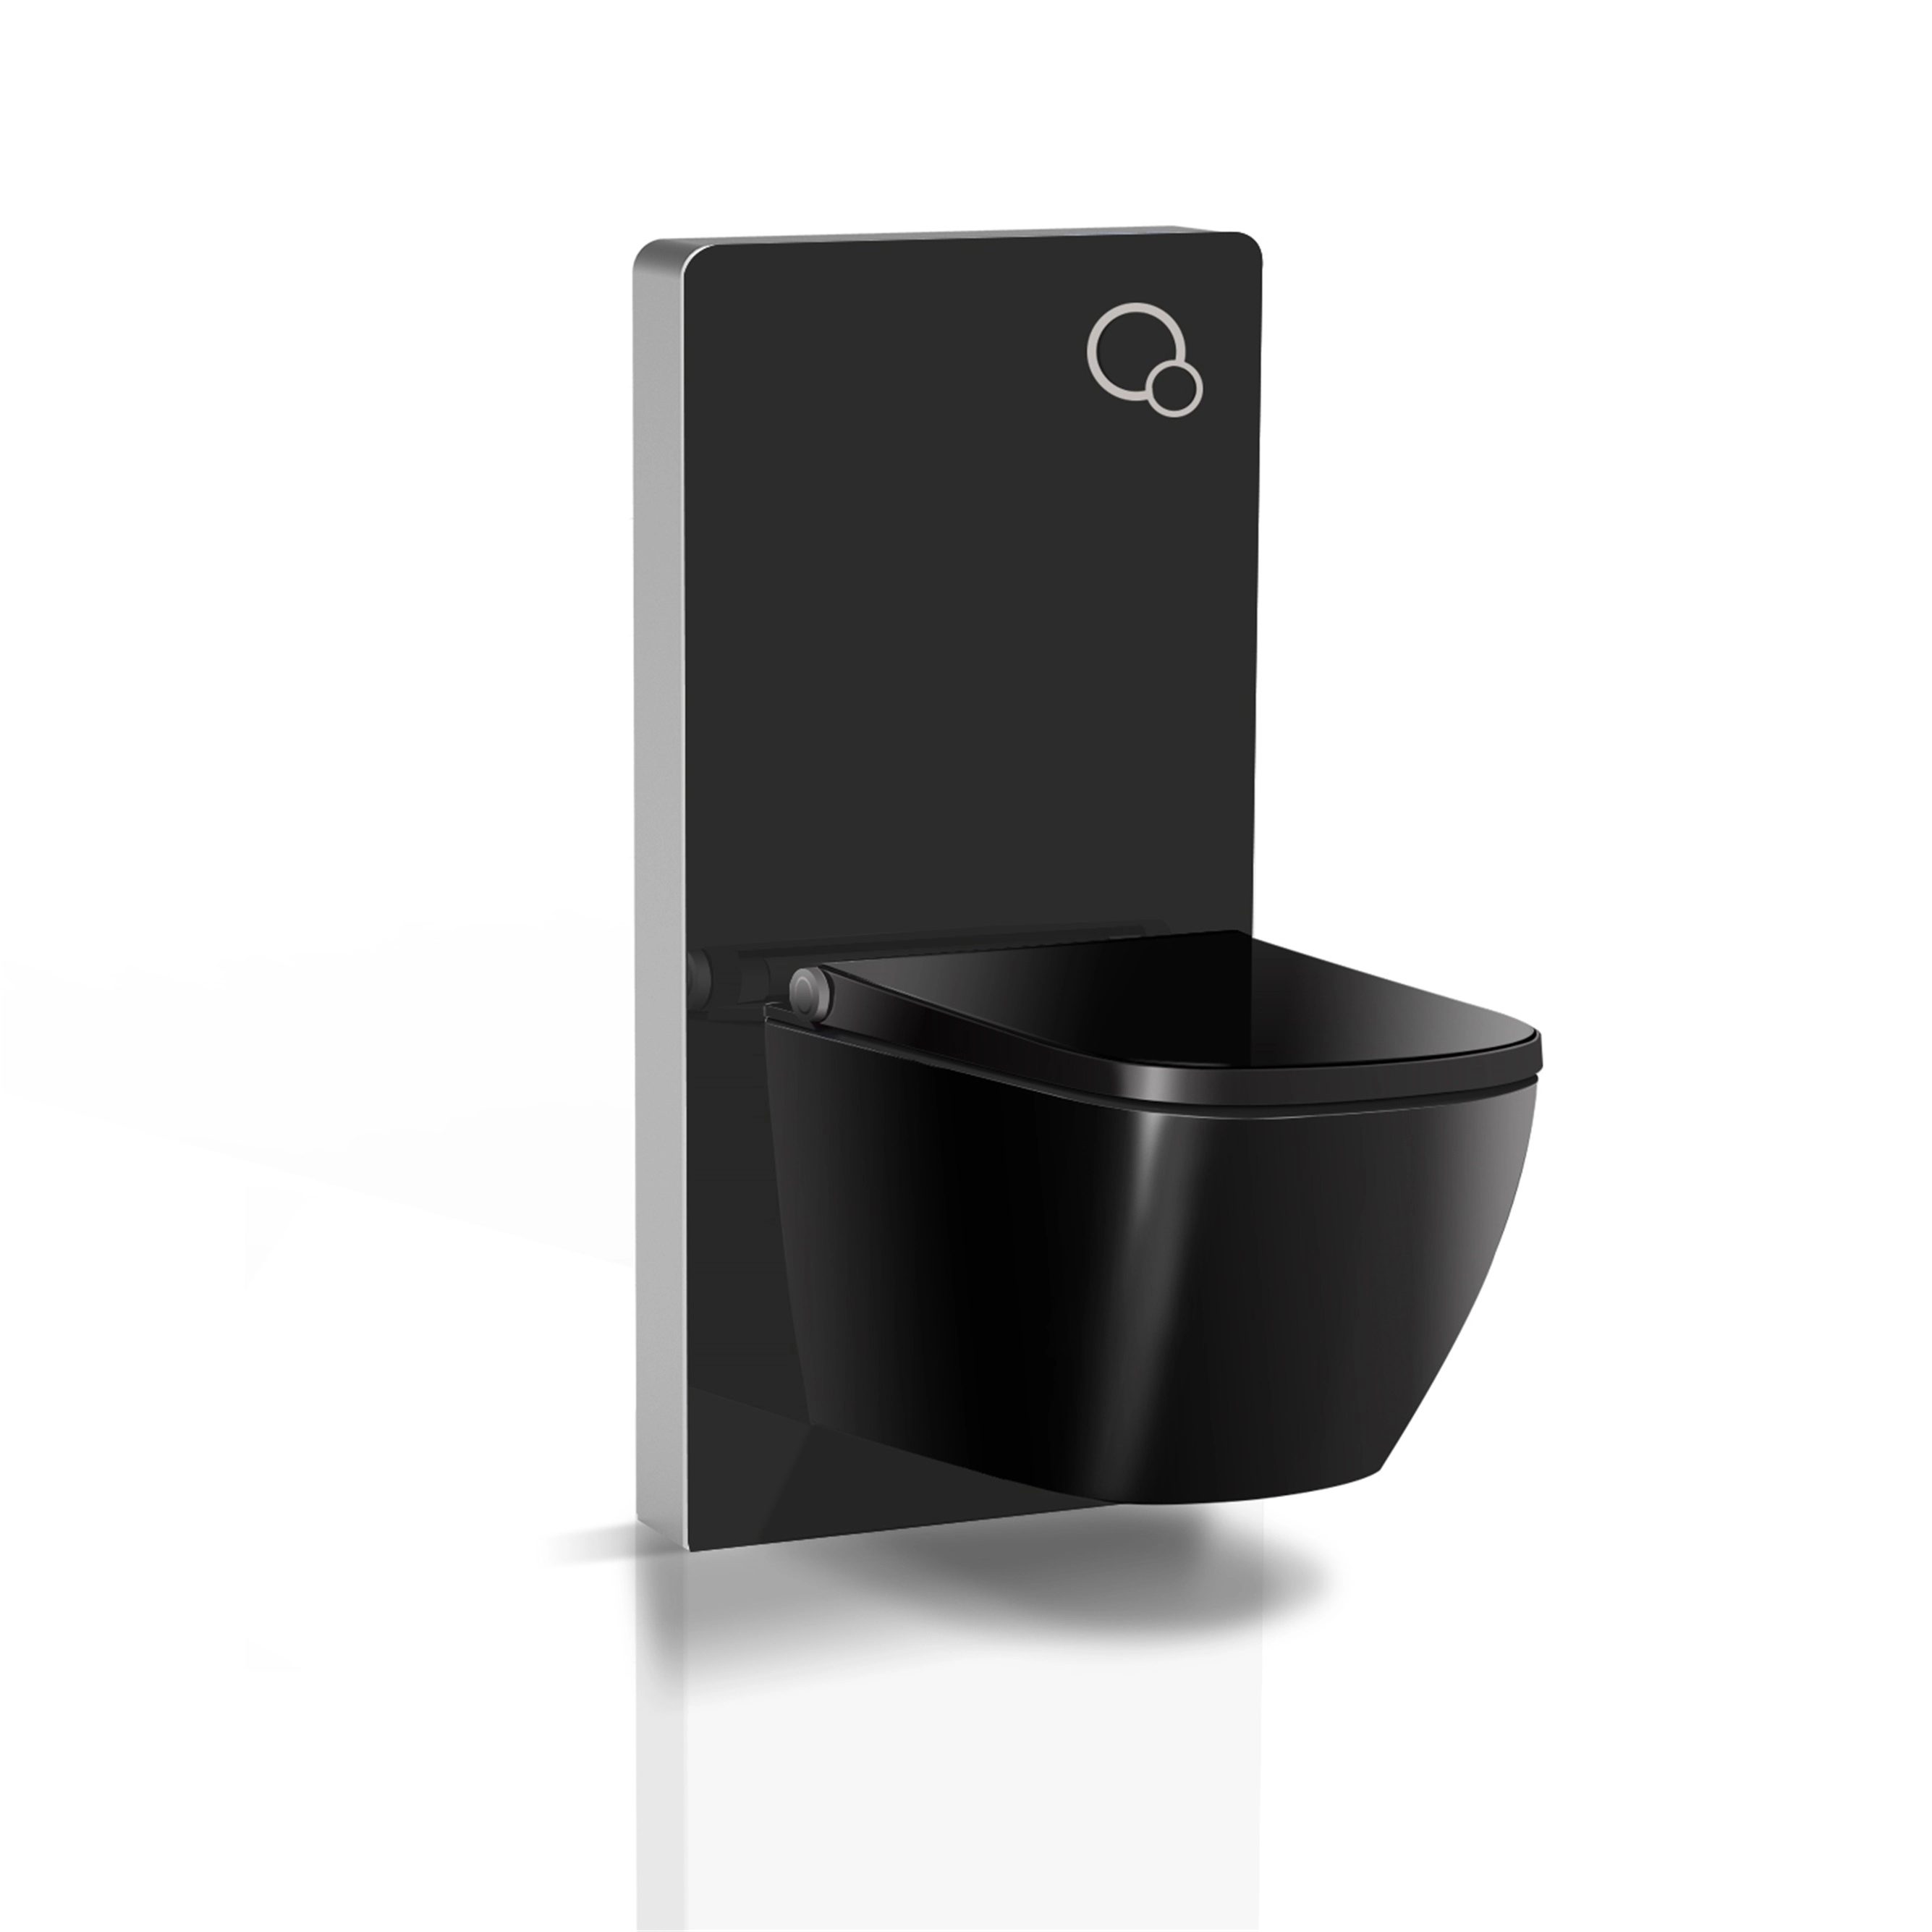 Exciting New Square Smart Toilet